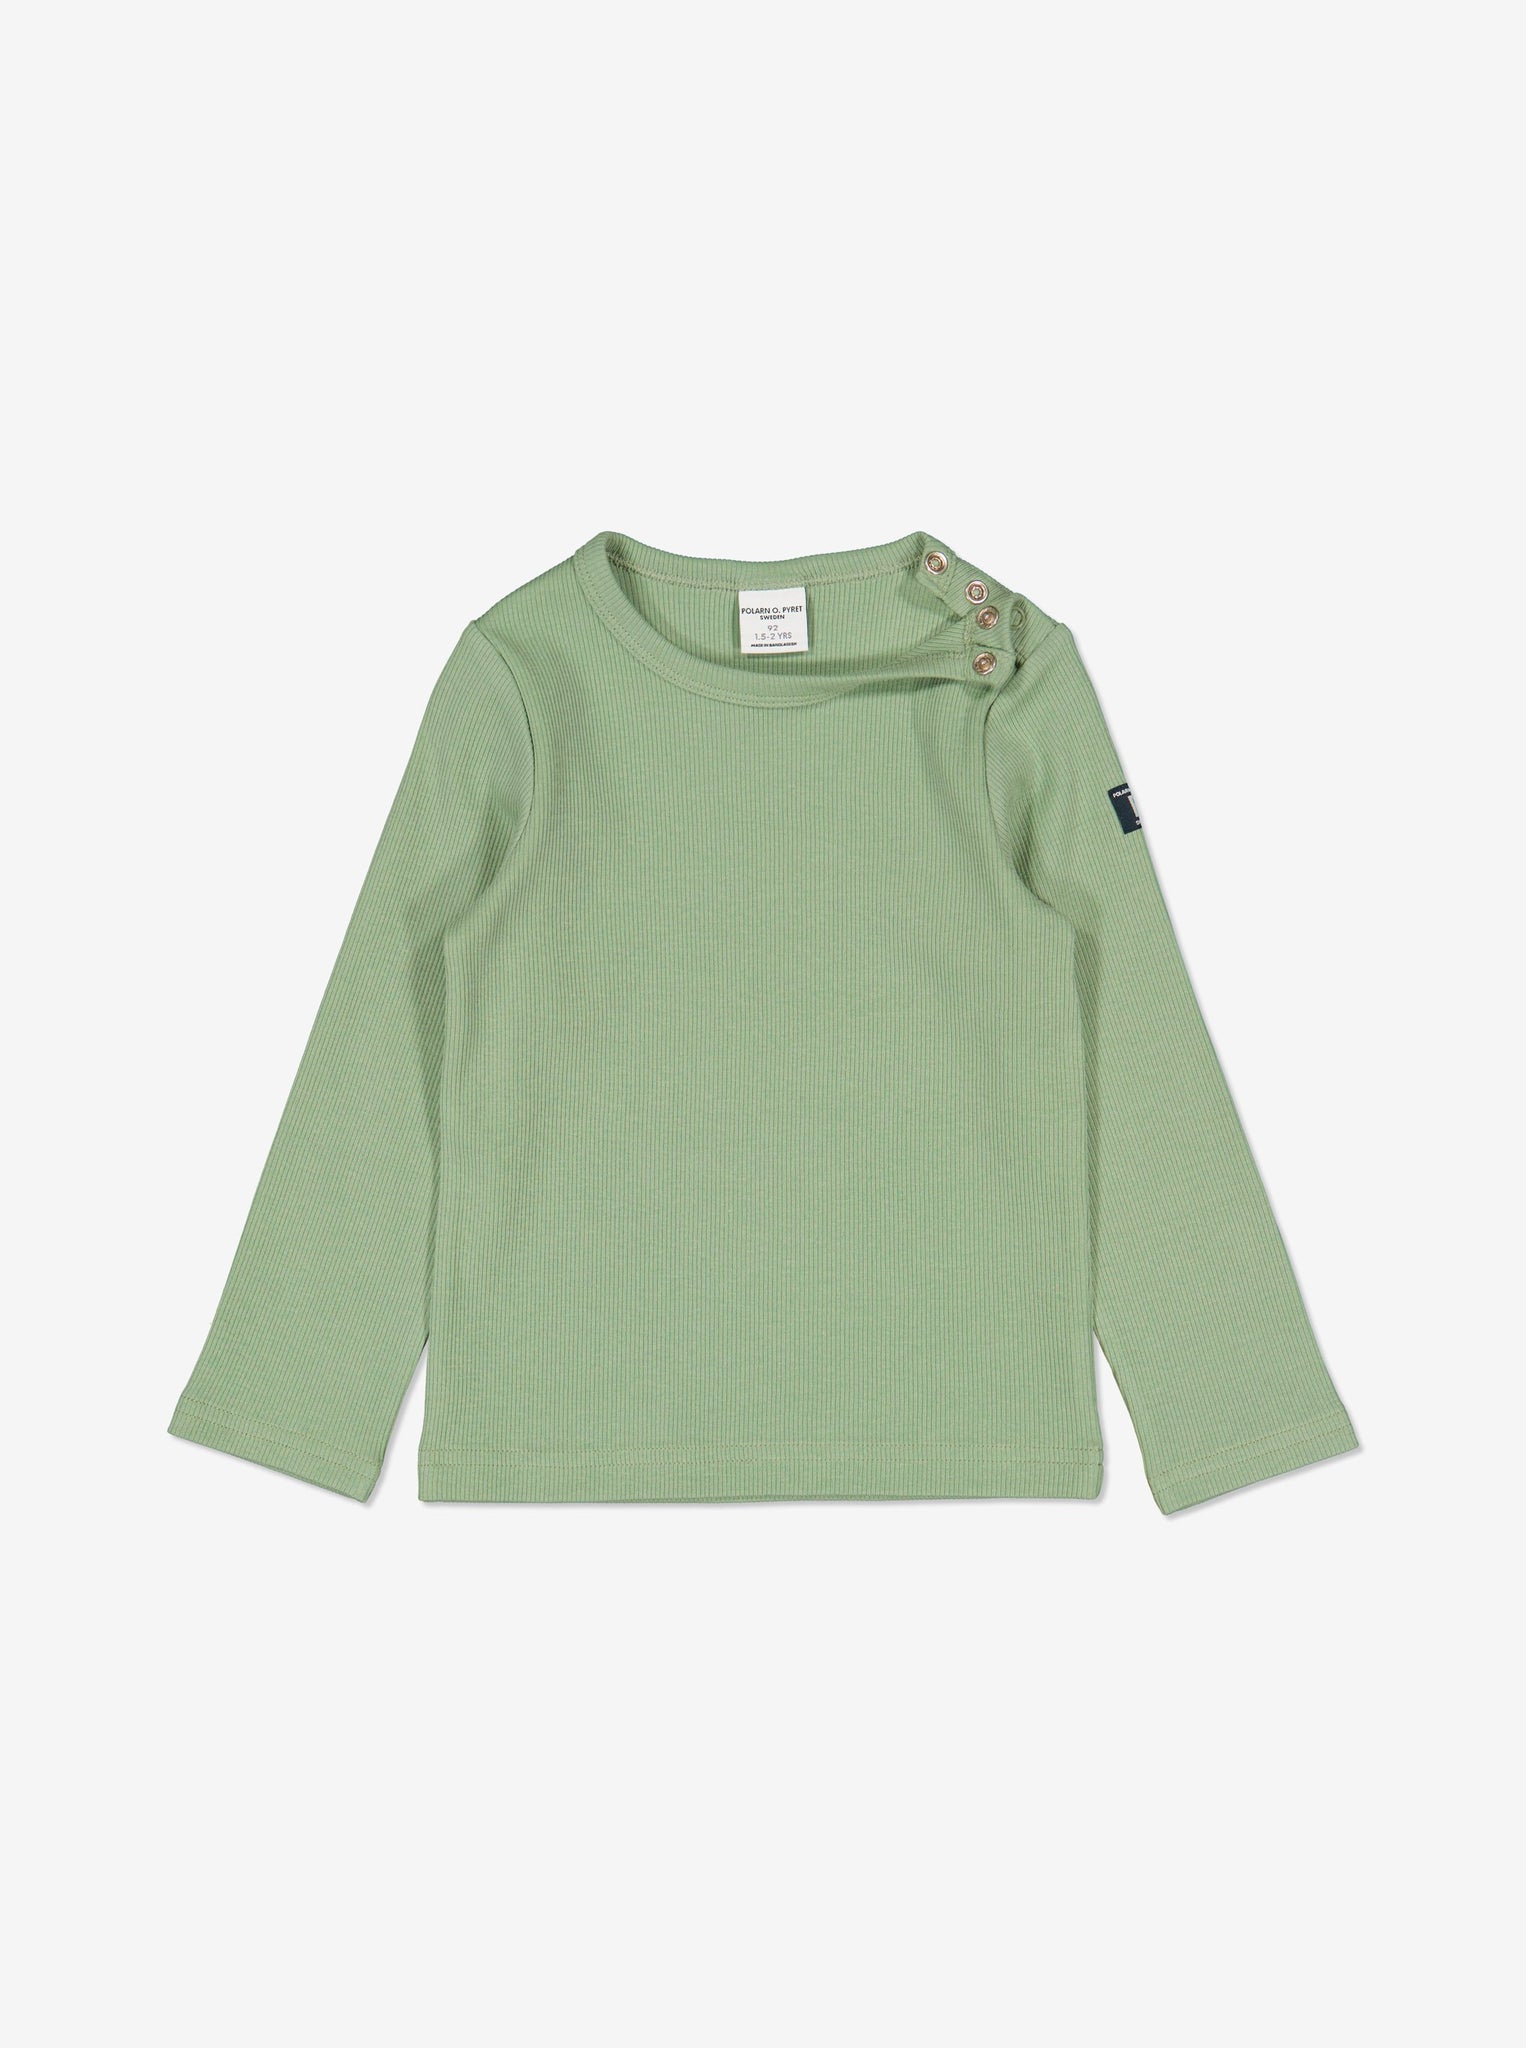  Organic Green Kids Top from Polarn O. Pyret Kidswear. Made from environmentally friendly materials.